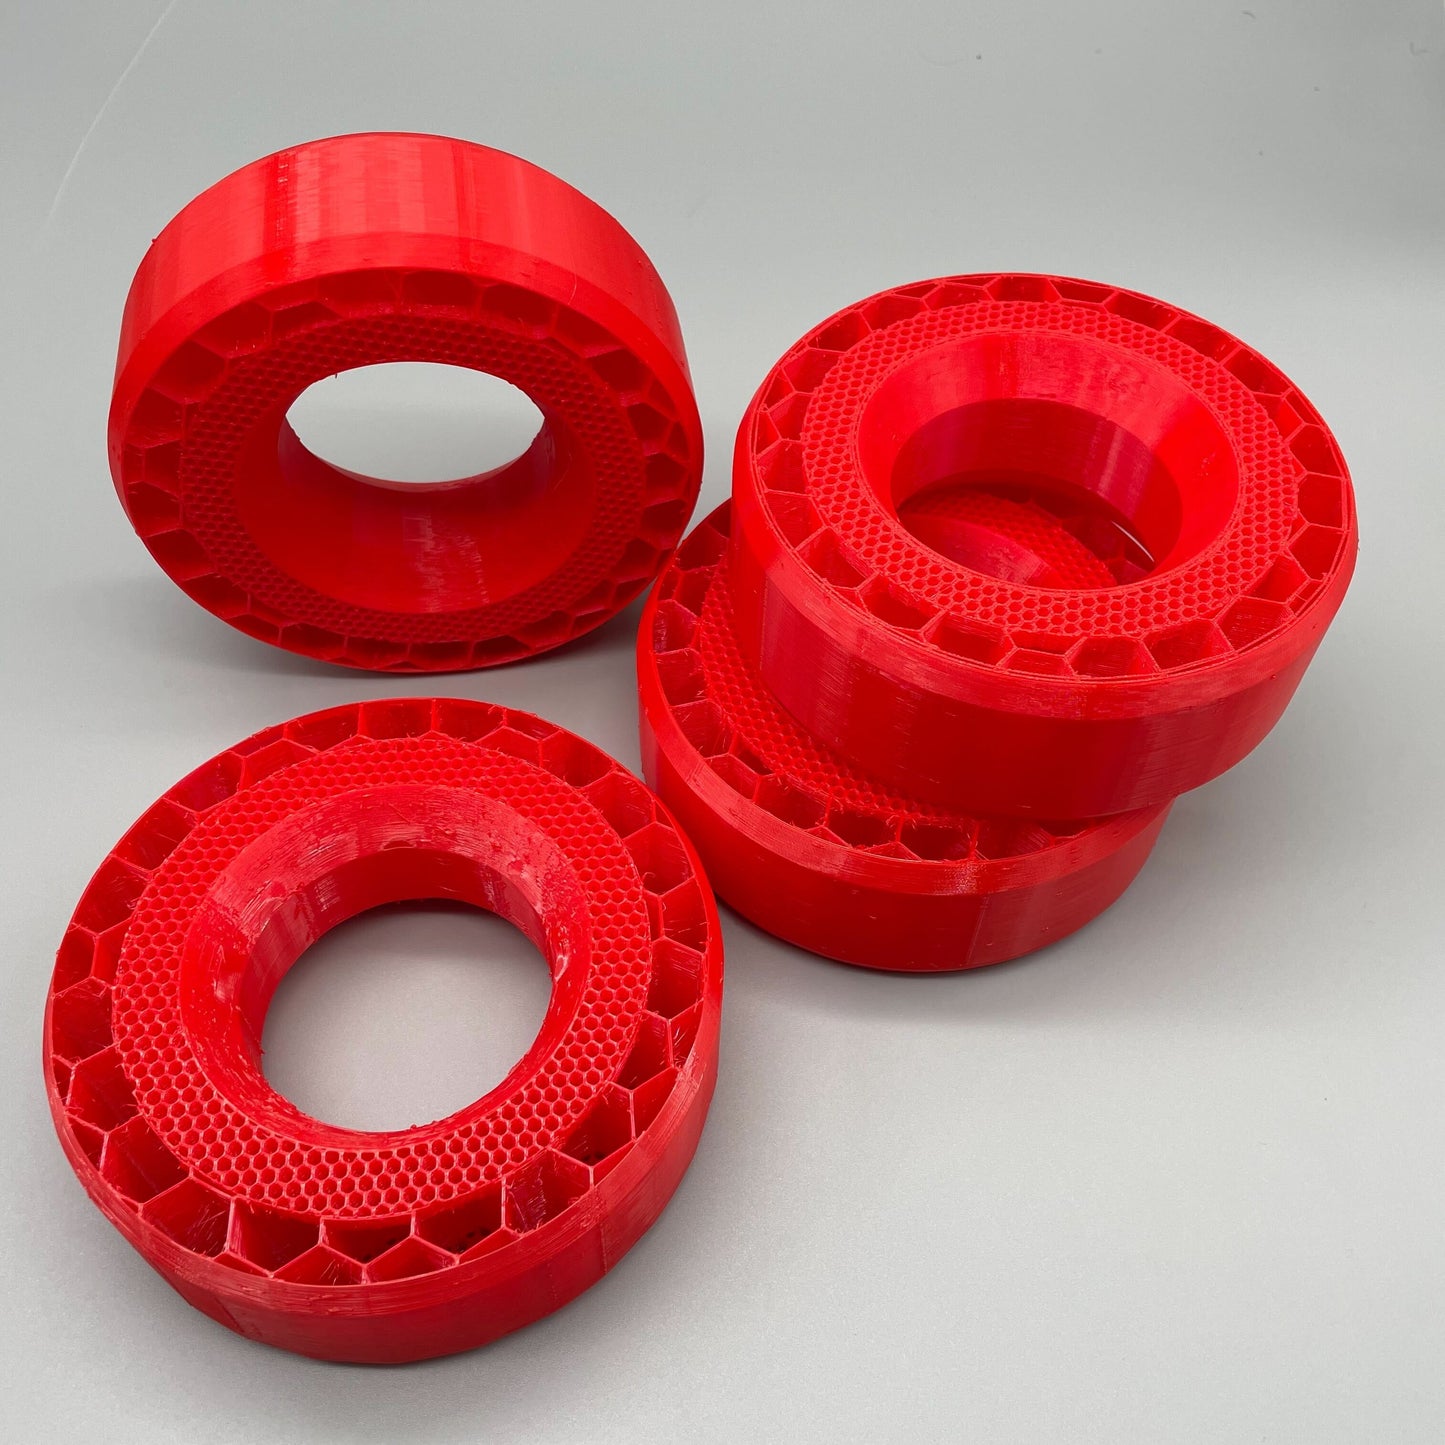 (4 Pack) 2.2 x 5.5 inch 3D Printed Wheel Tire Inserts for 1/10 Scale RC Crawler